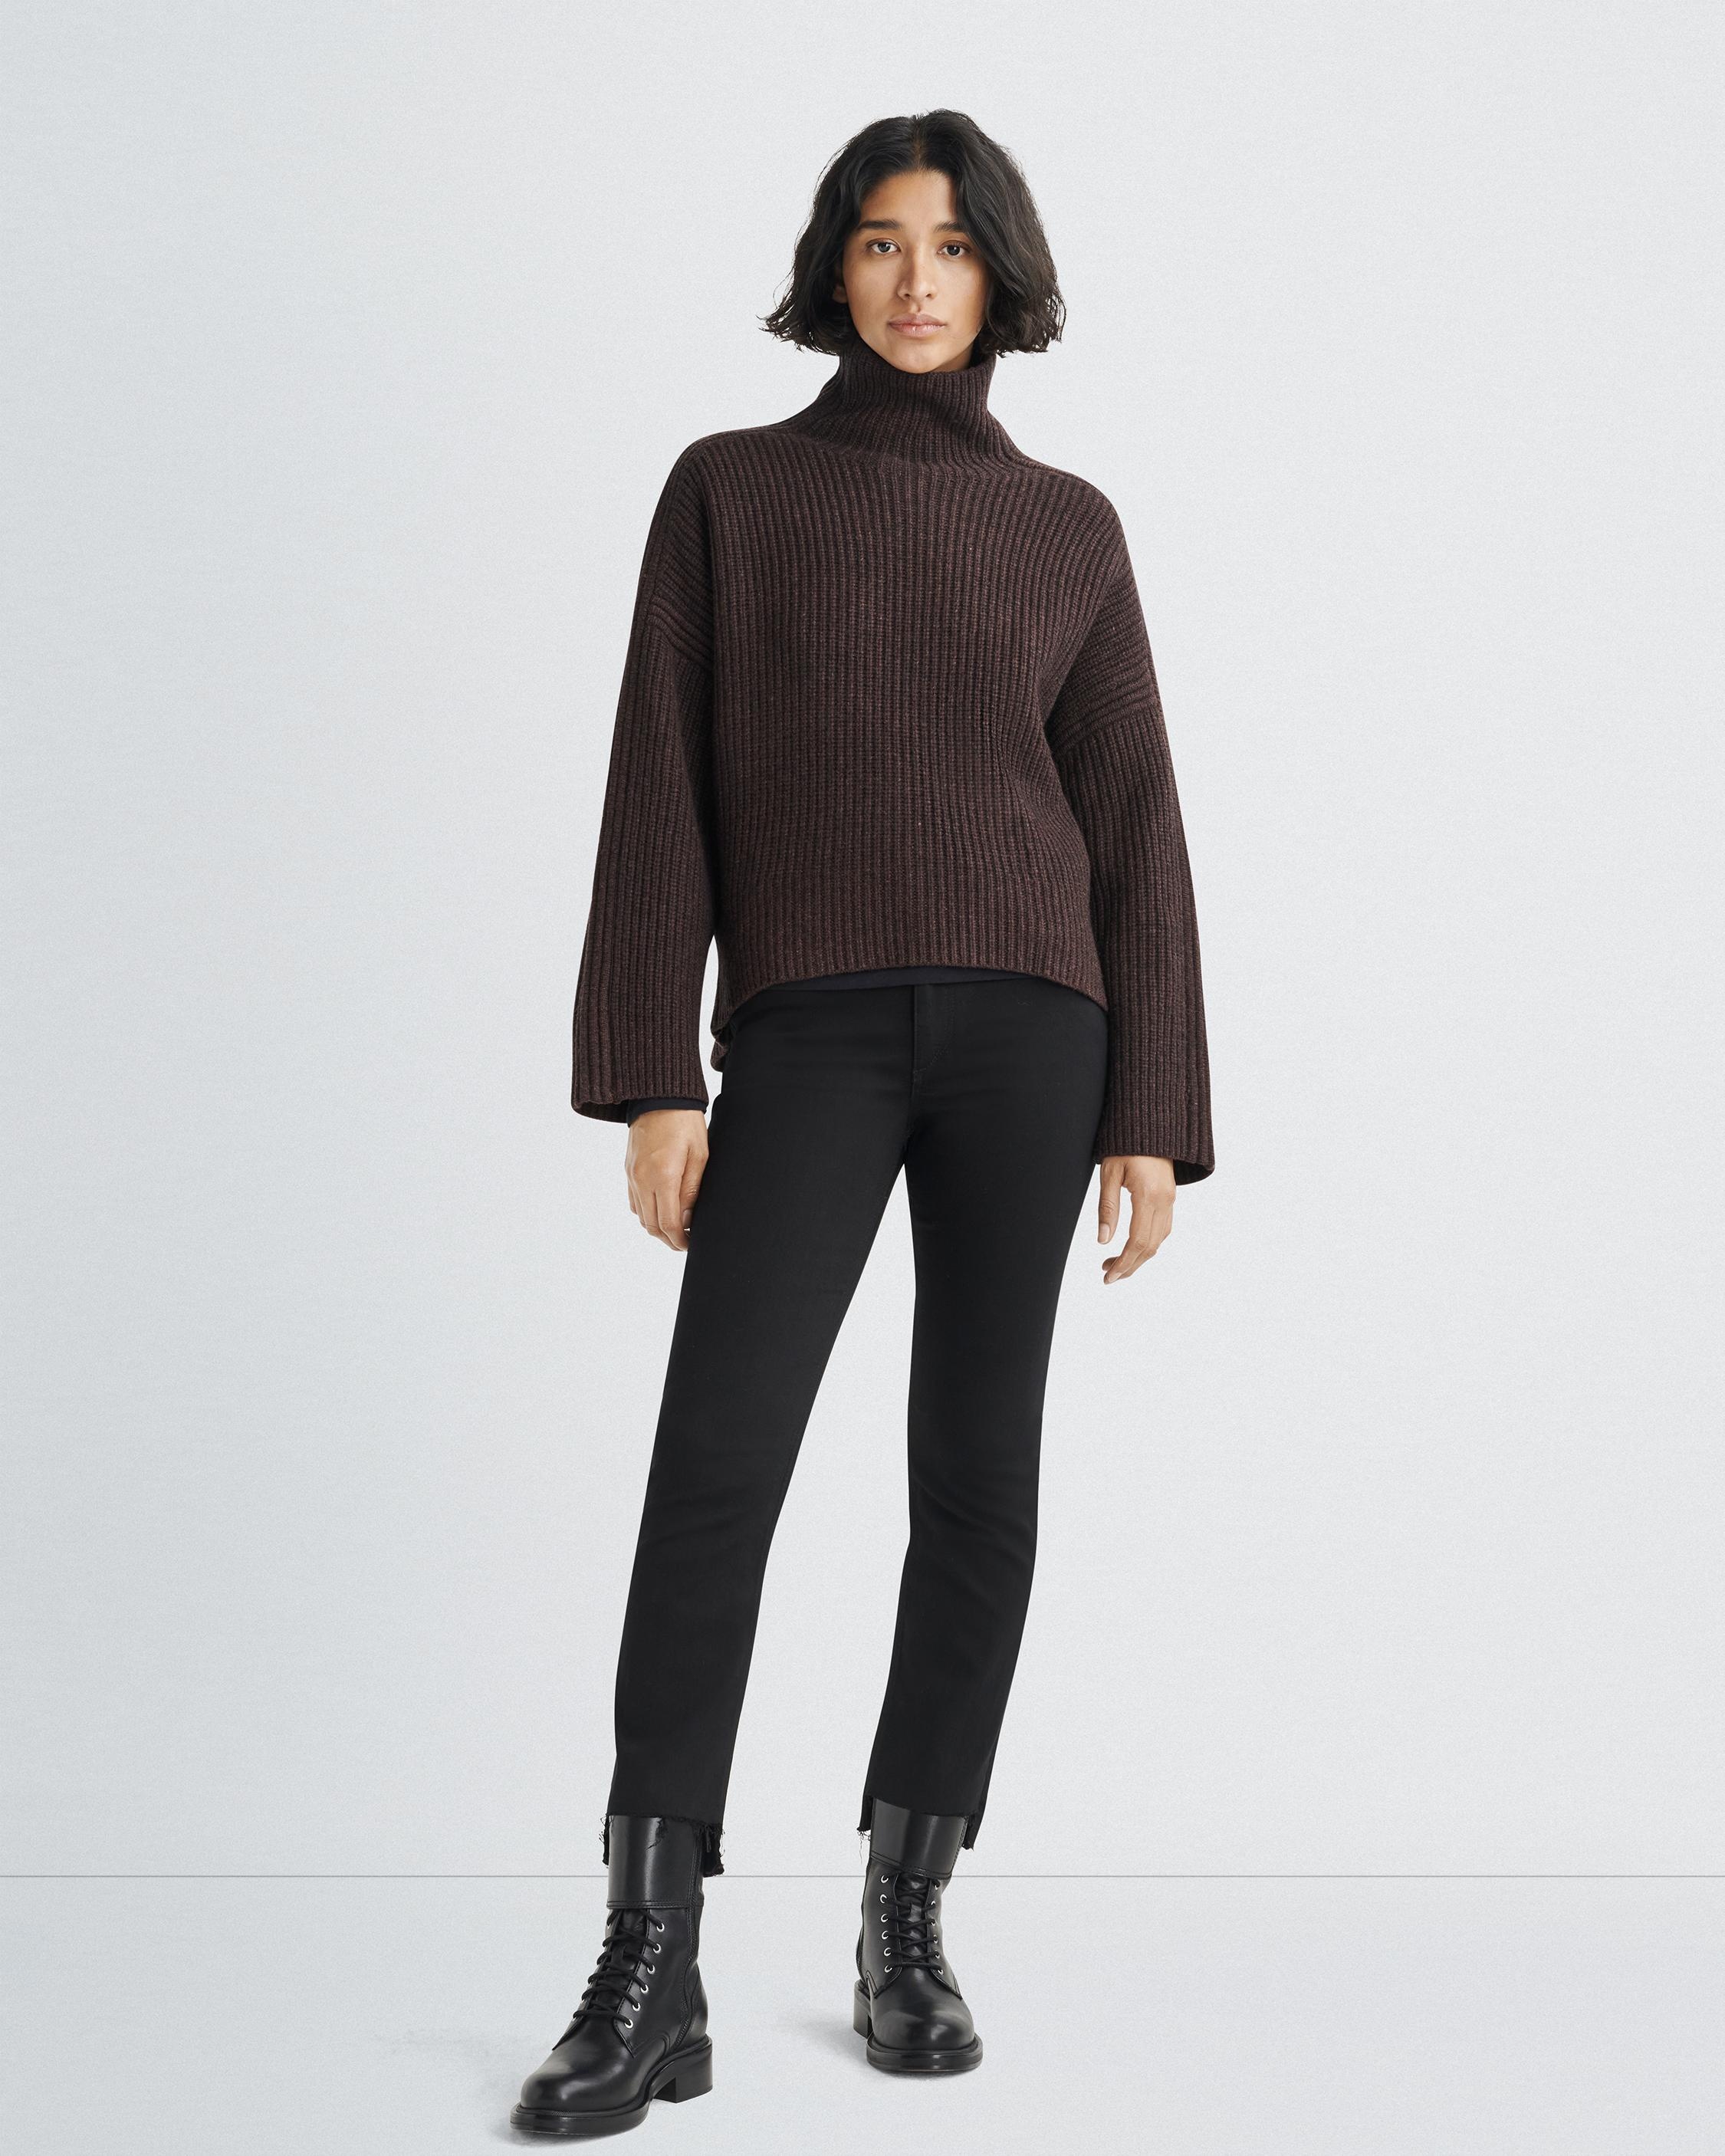 Connie Wool Turtleneck
Oversized Fit - 3